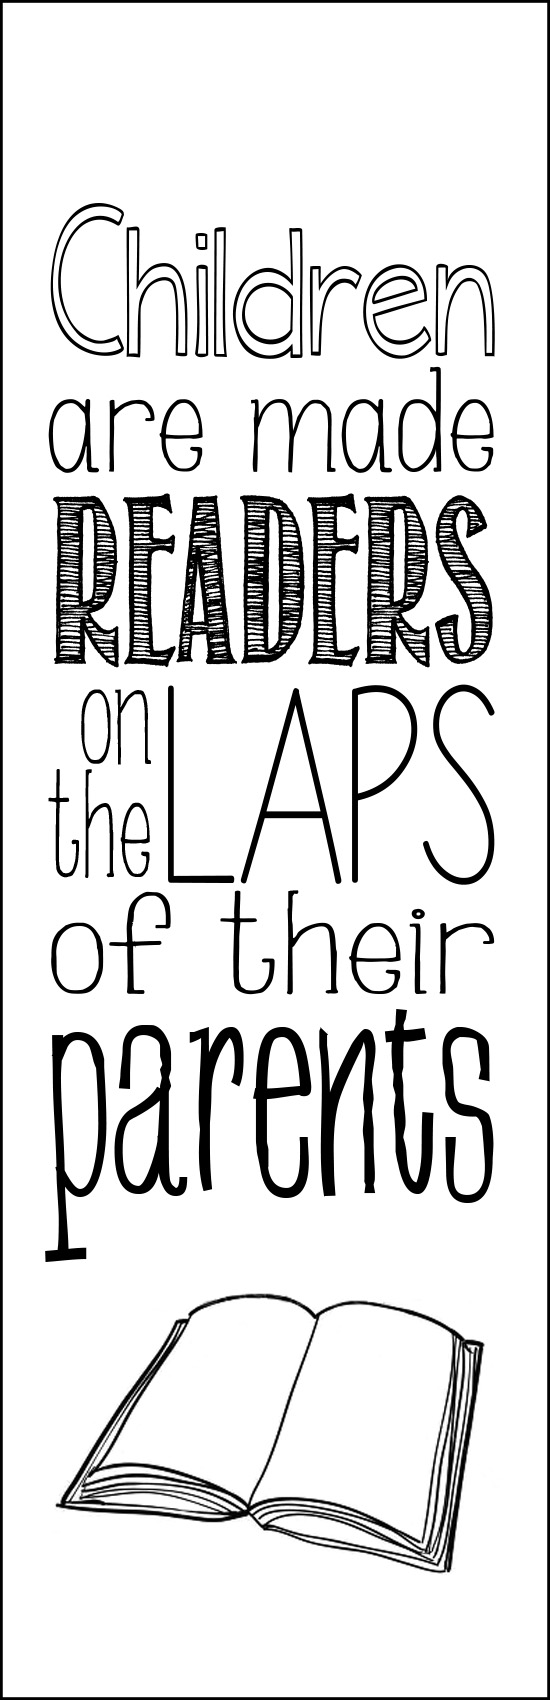 "Children are made readers on the laps of their parents" - free printable bookmark from unOriginalMom.com